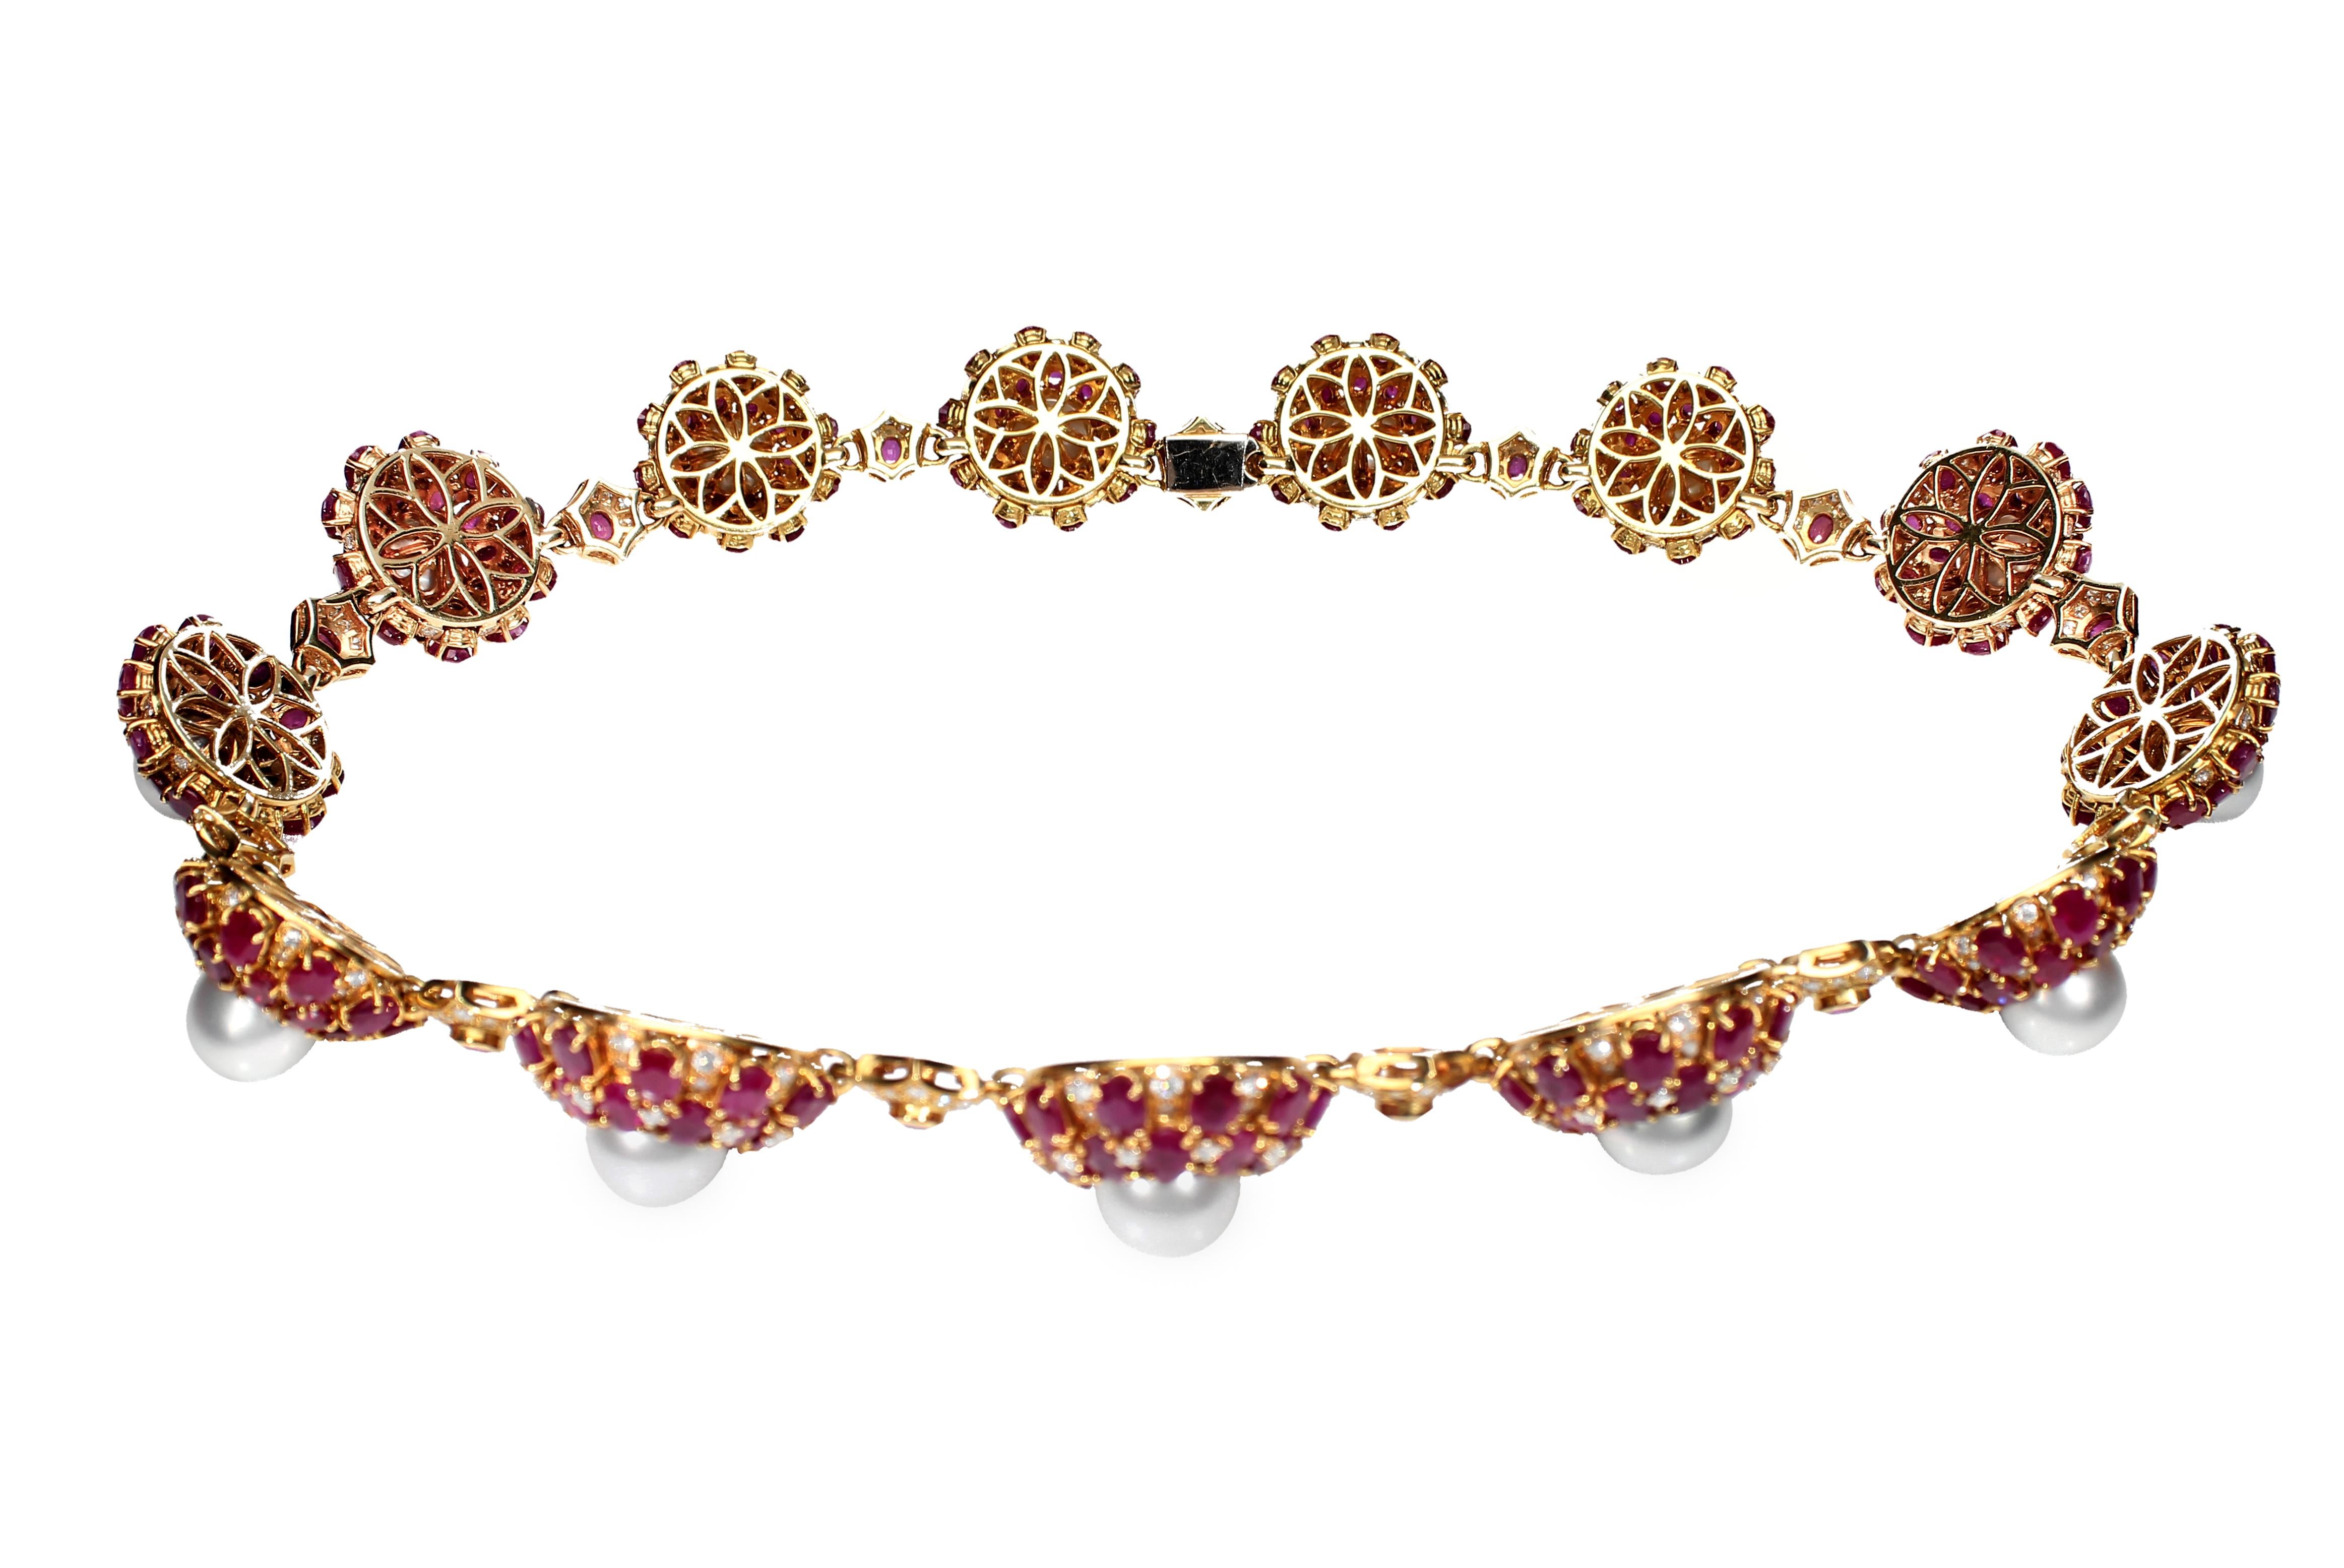 Parure with Rubies, Pearls and Diamonds in 18 Karat Yellow Gold 9